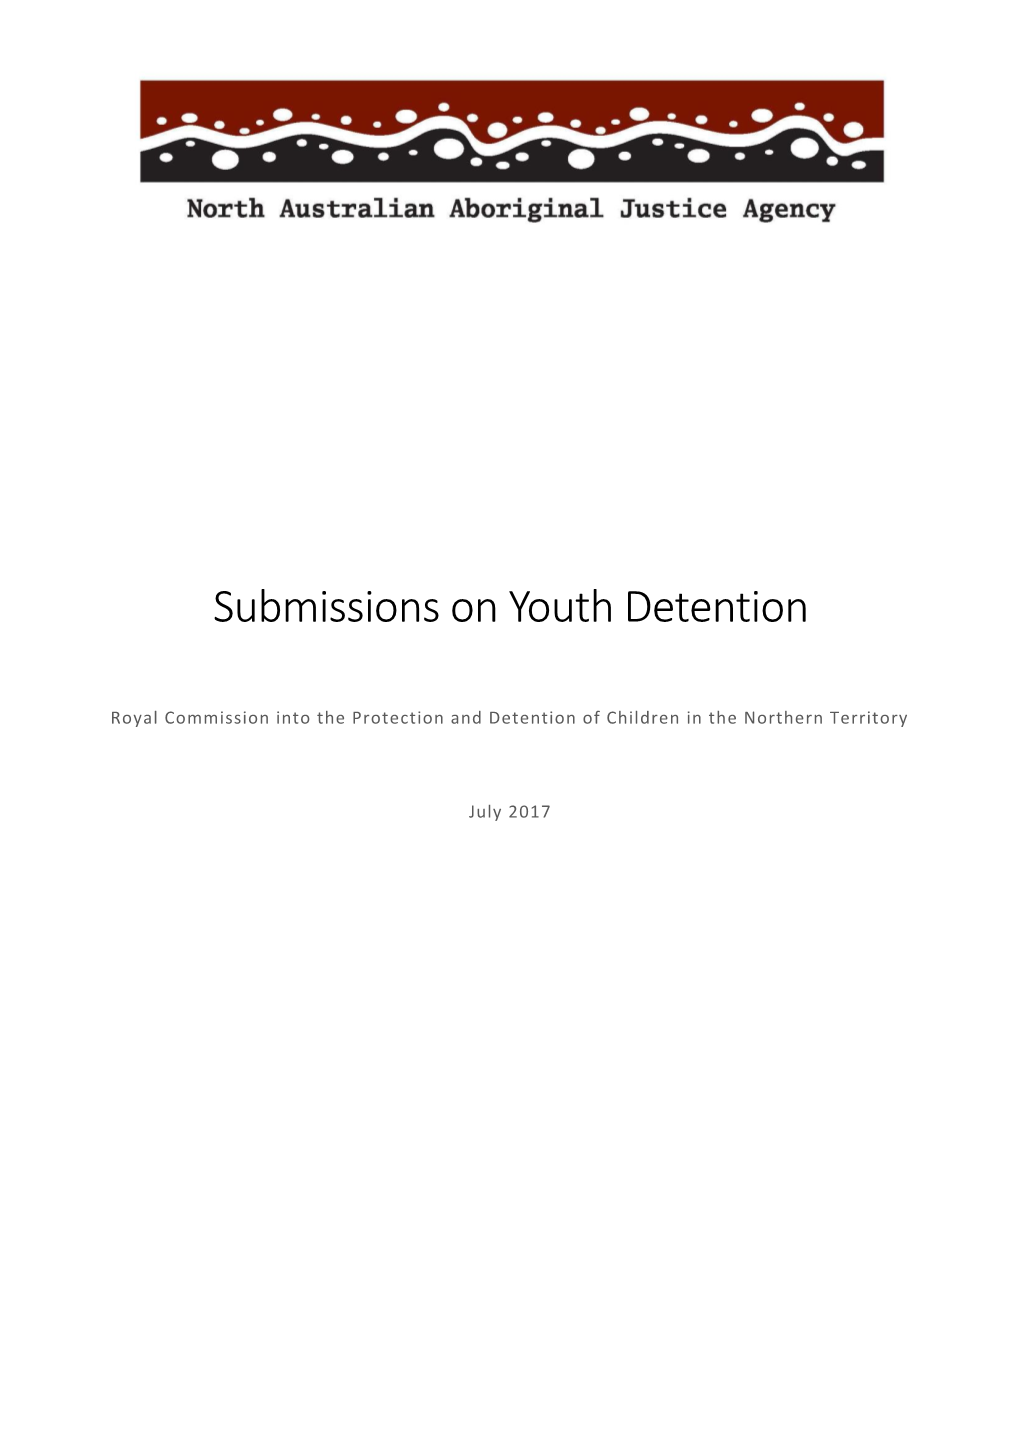 Submissions on Youth Detention